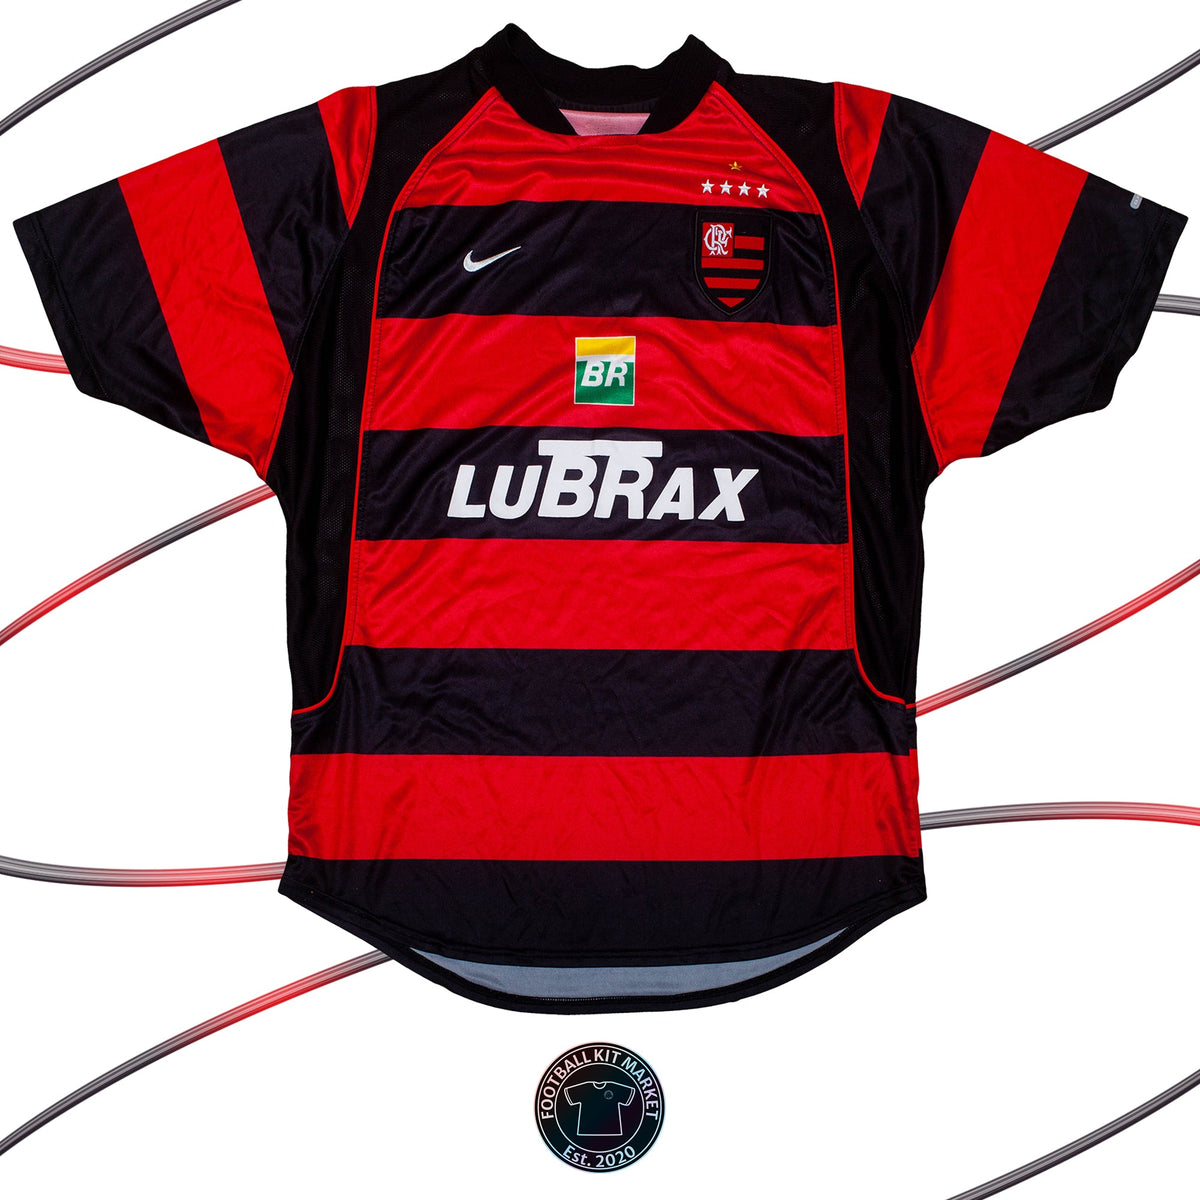 Genuine FLAMENGO Home Shirt (2003-2004) - NIKE (XL) - Product Image from Football Kit Market